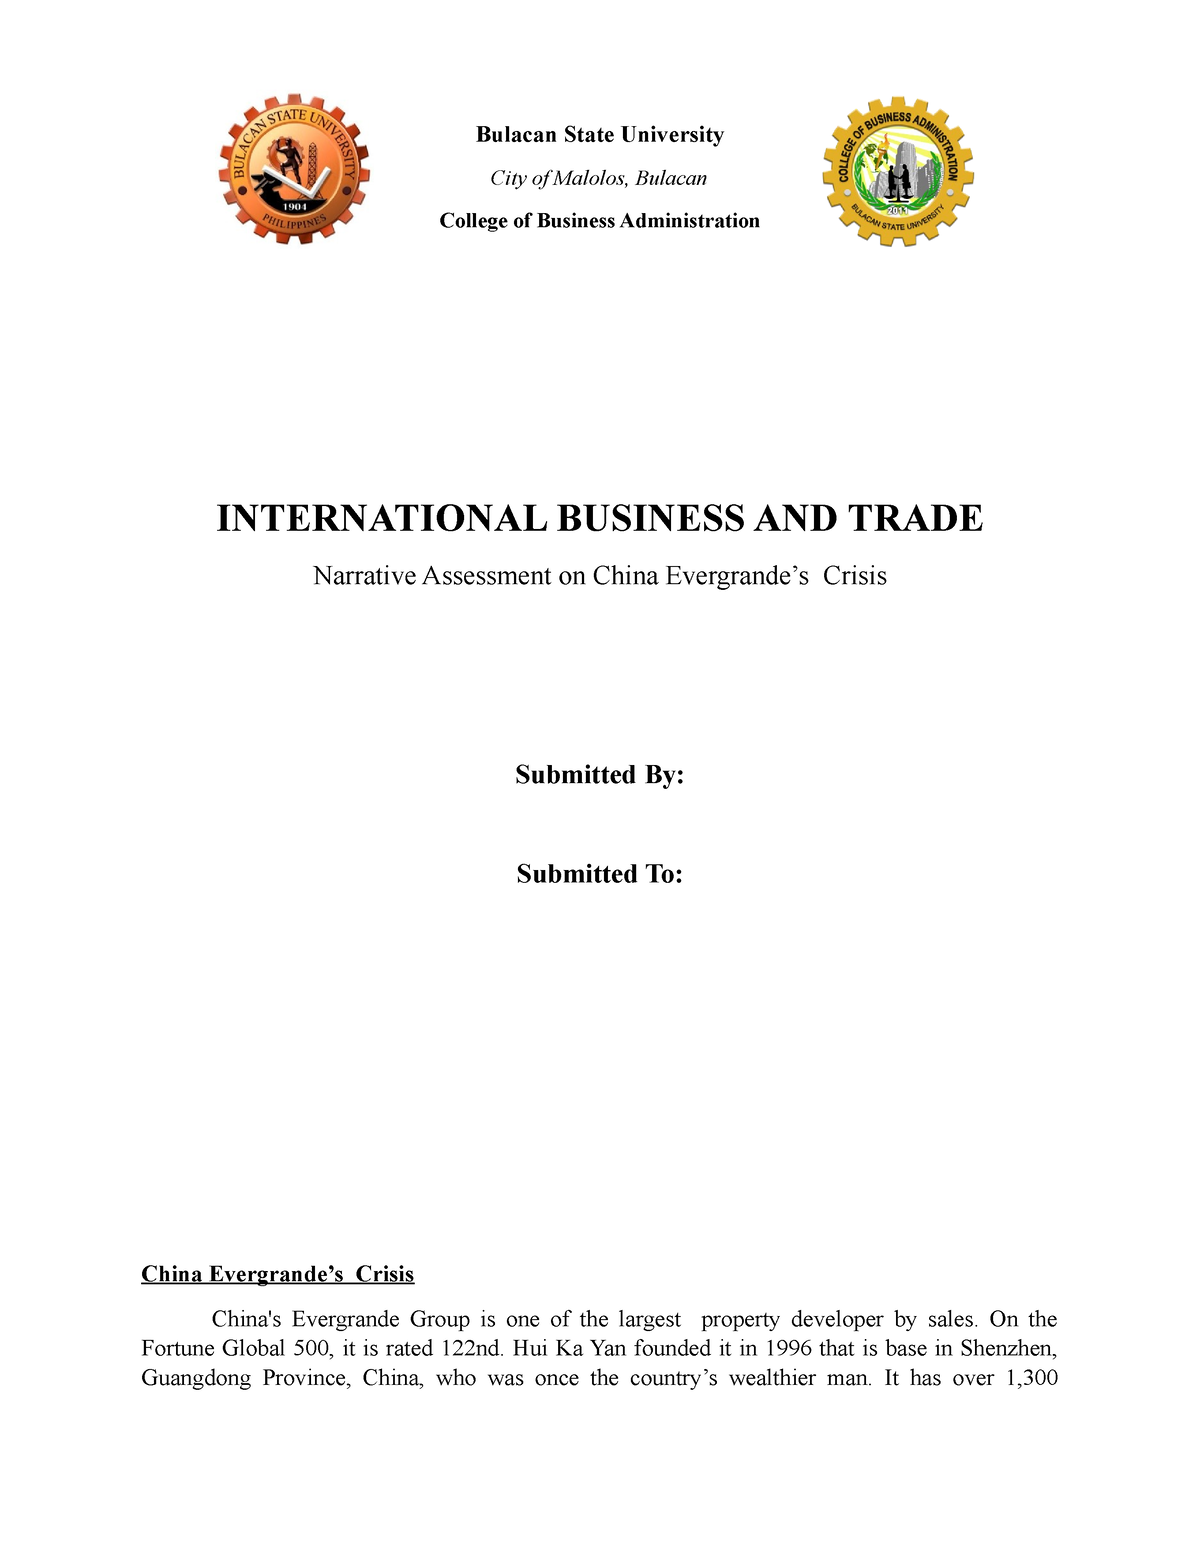 essay about international business and trade